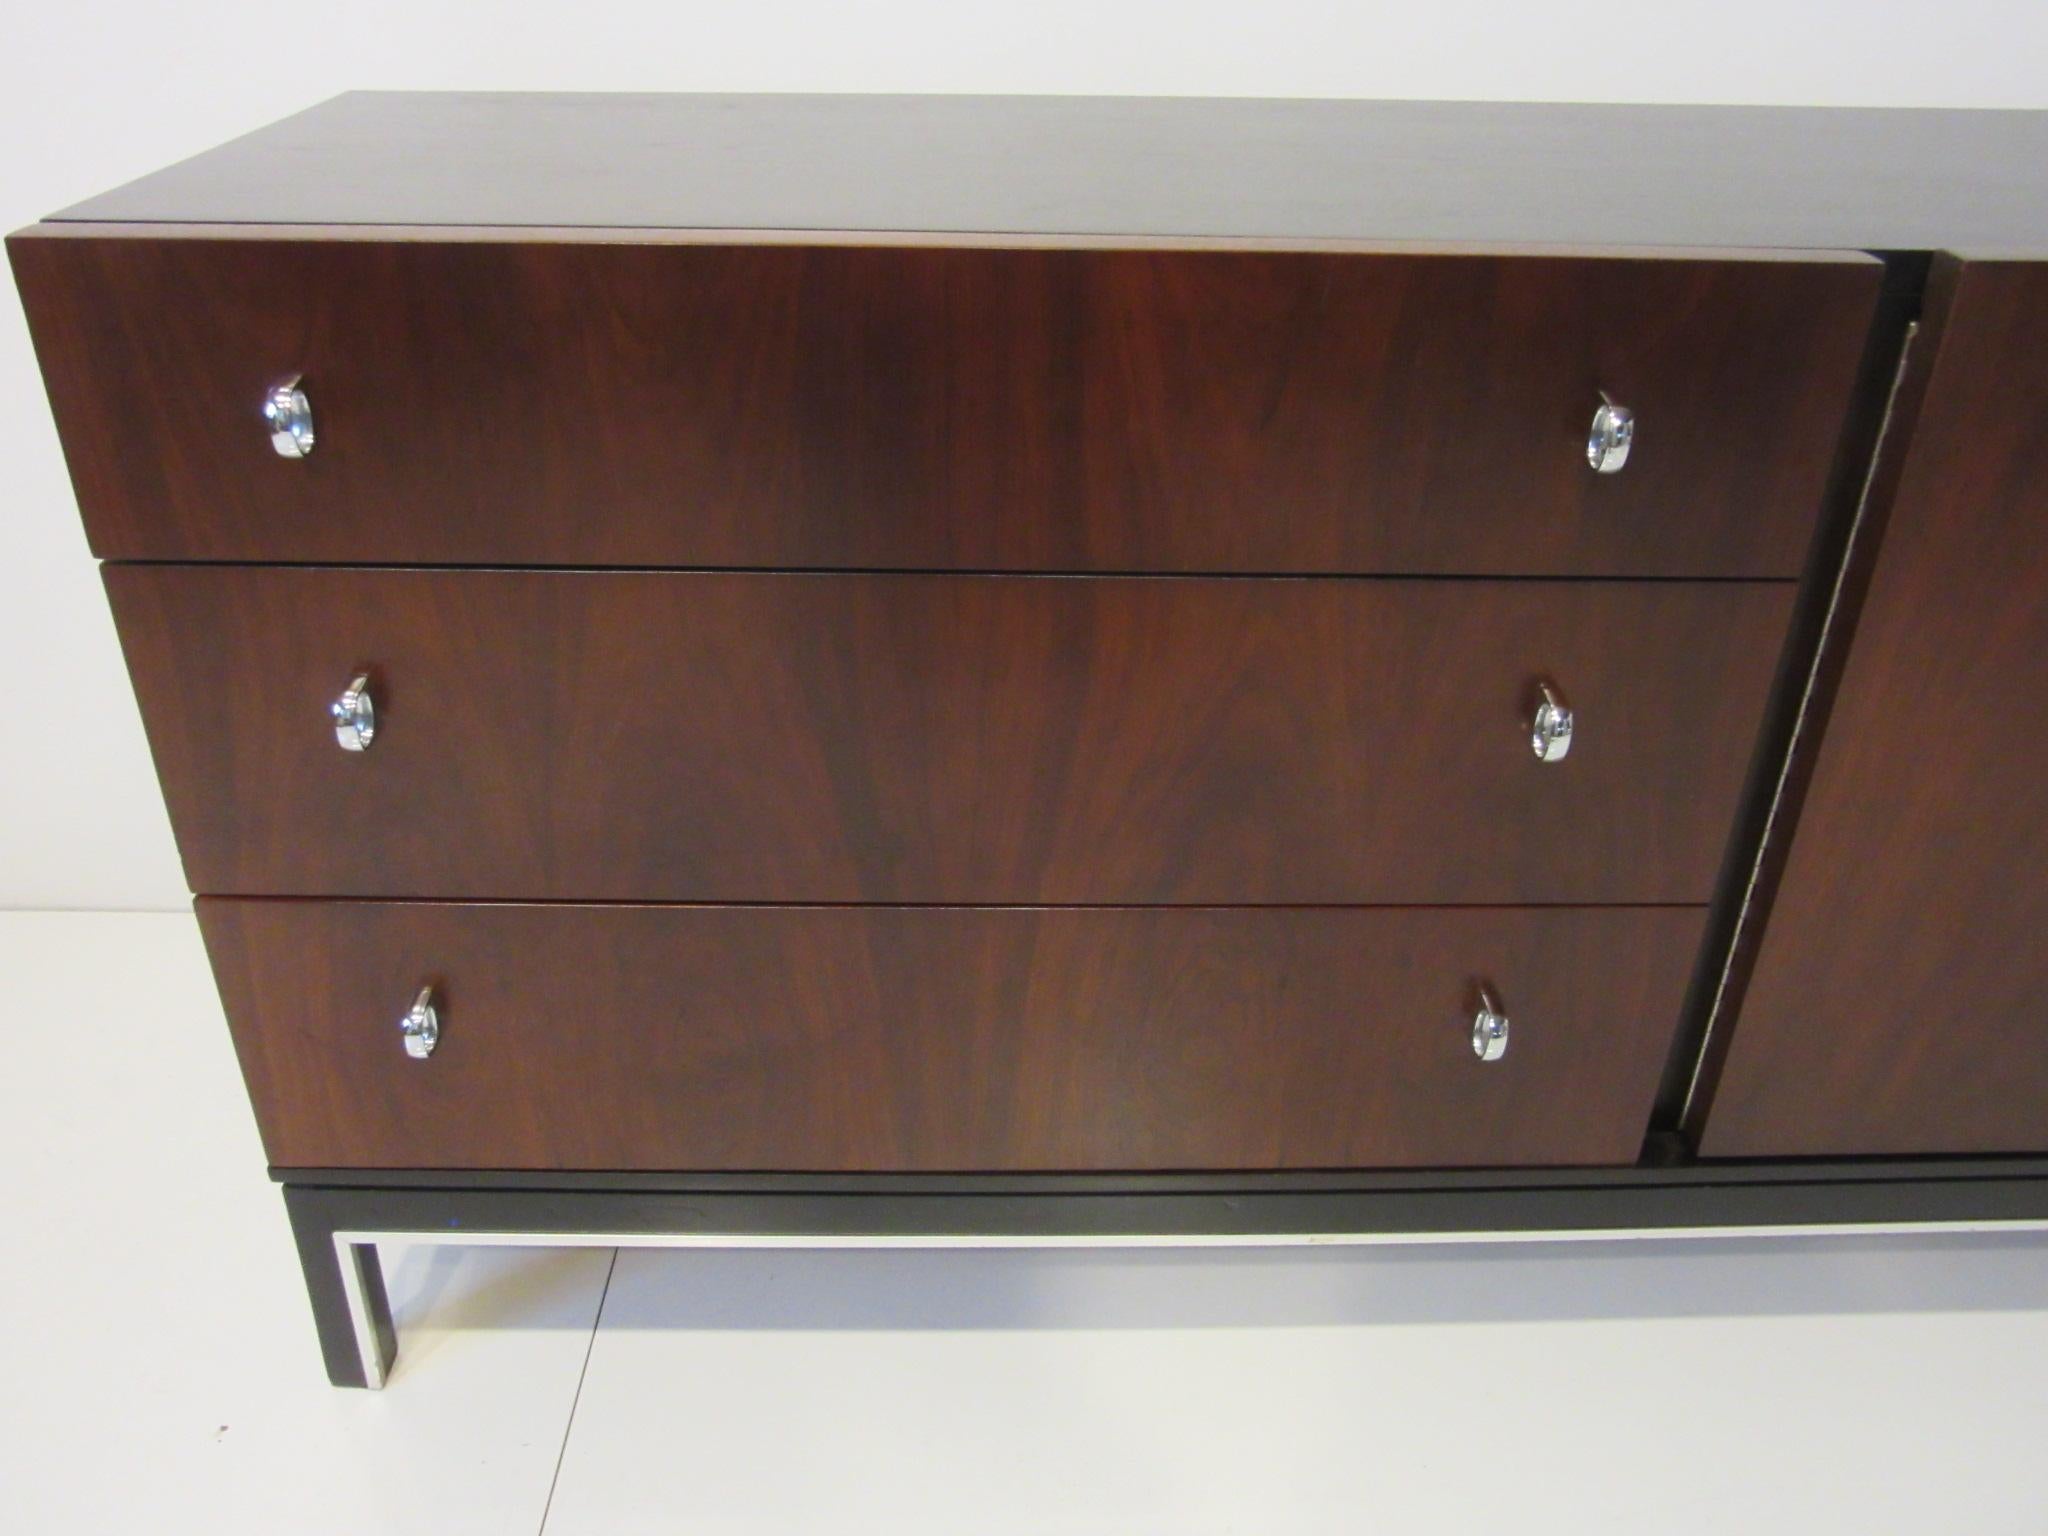 Rosewood Ebony Dresser / Credenza by American of Martinsville 4